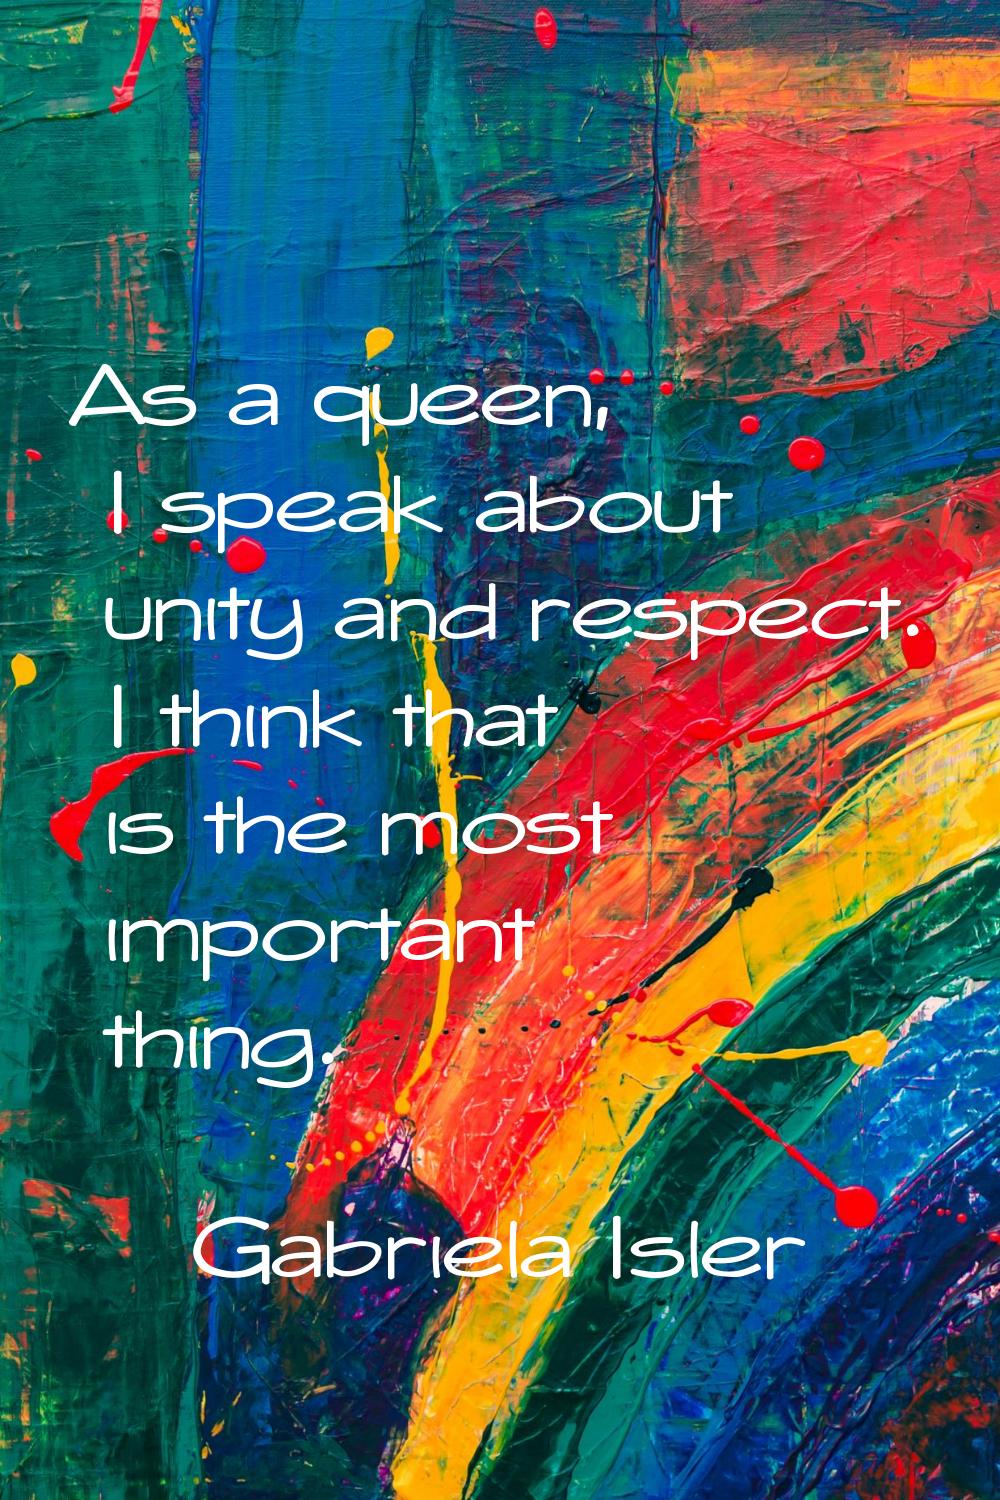 As a queen, I speak about unity and respect. I think that is the most important thing.